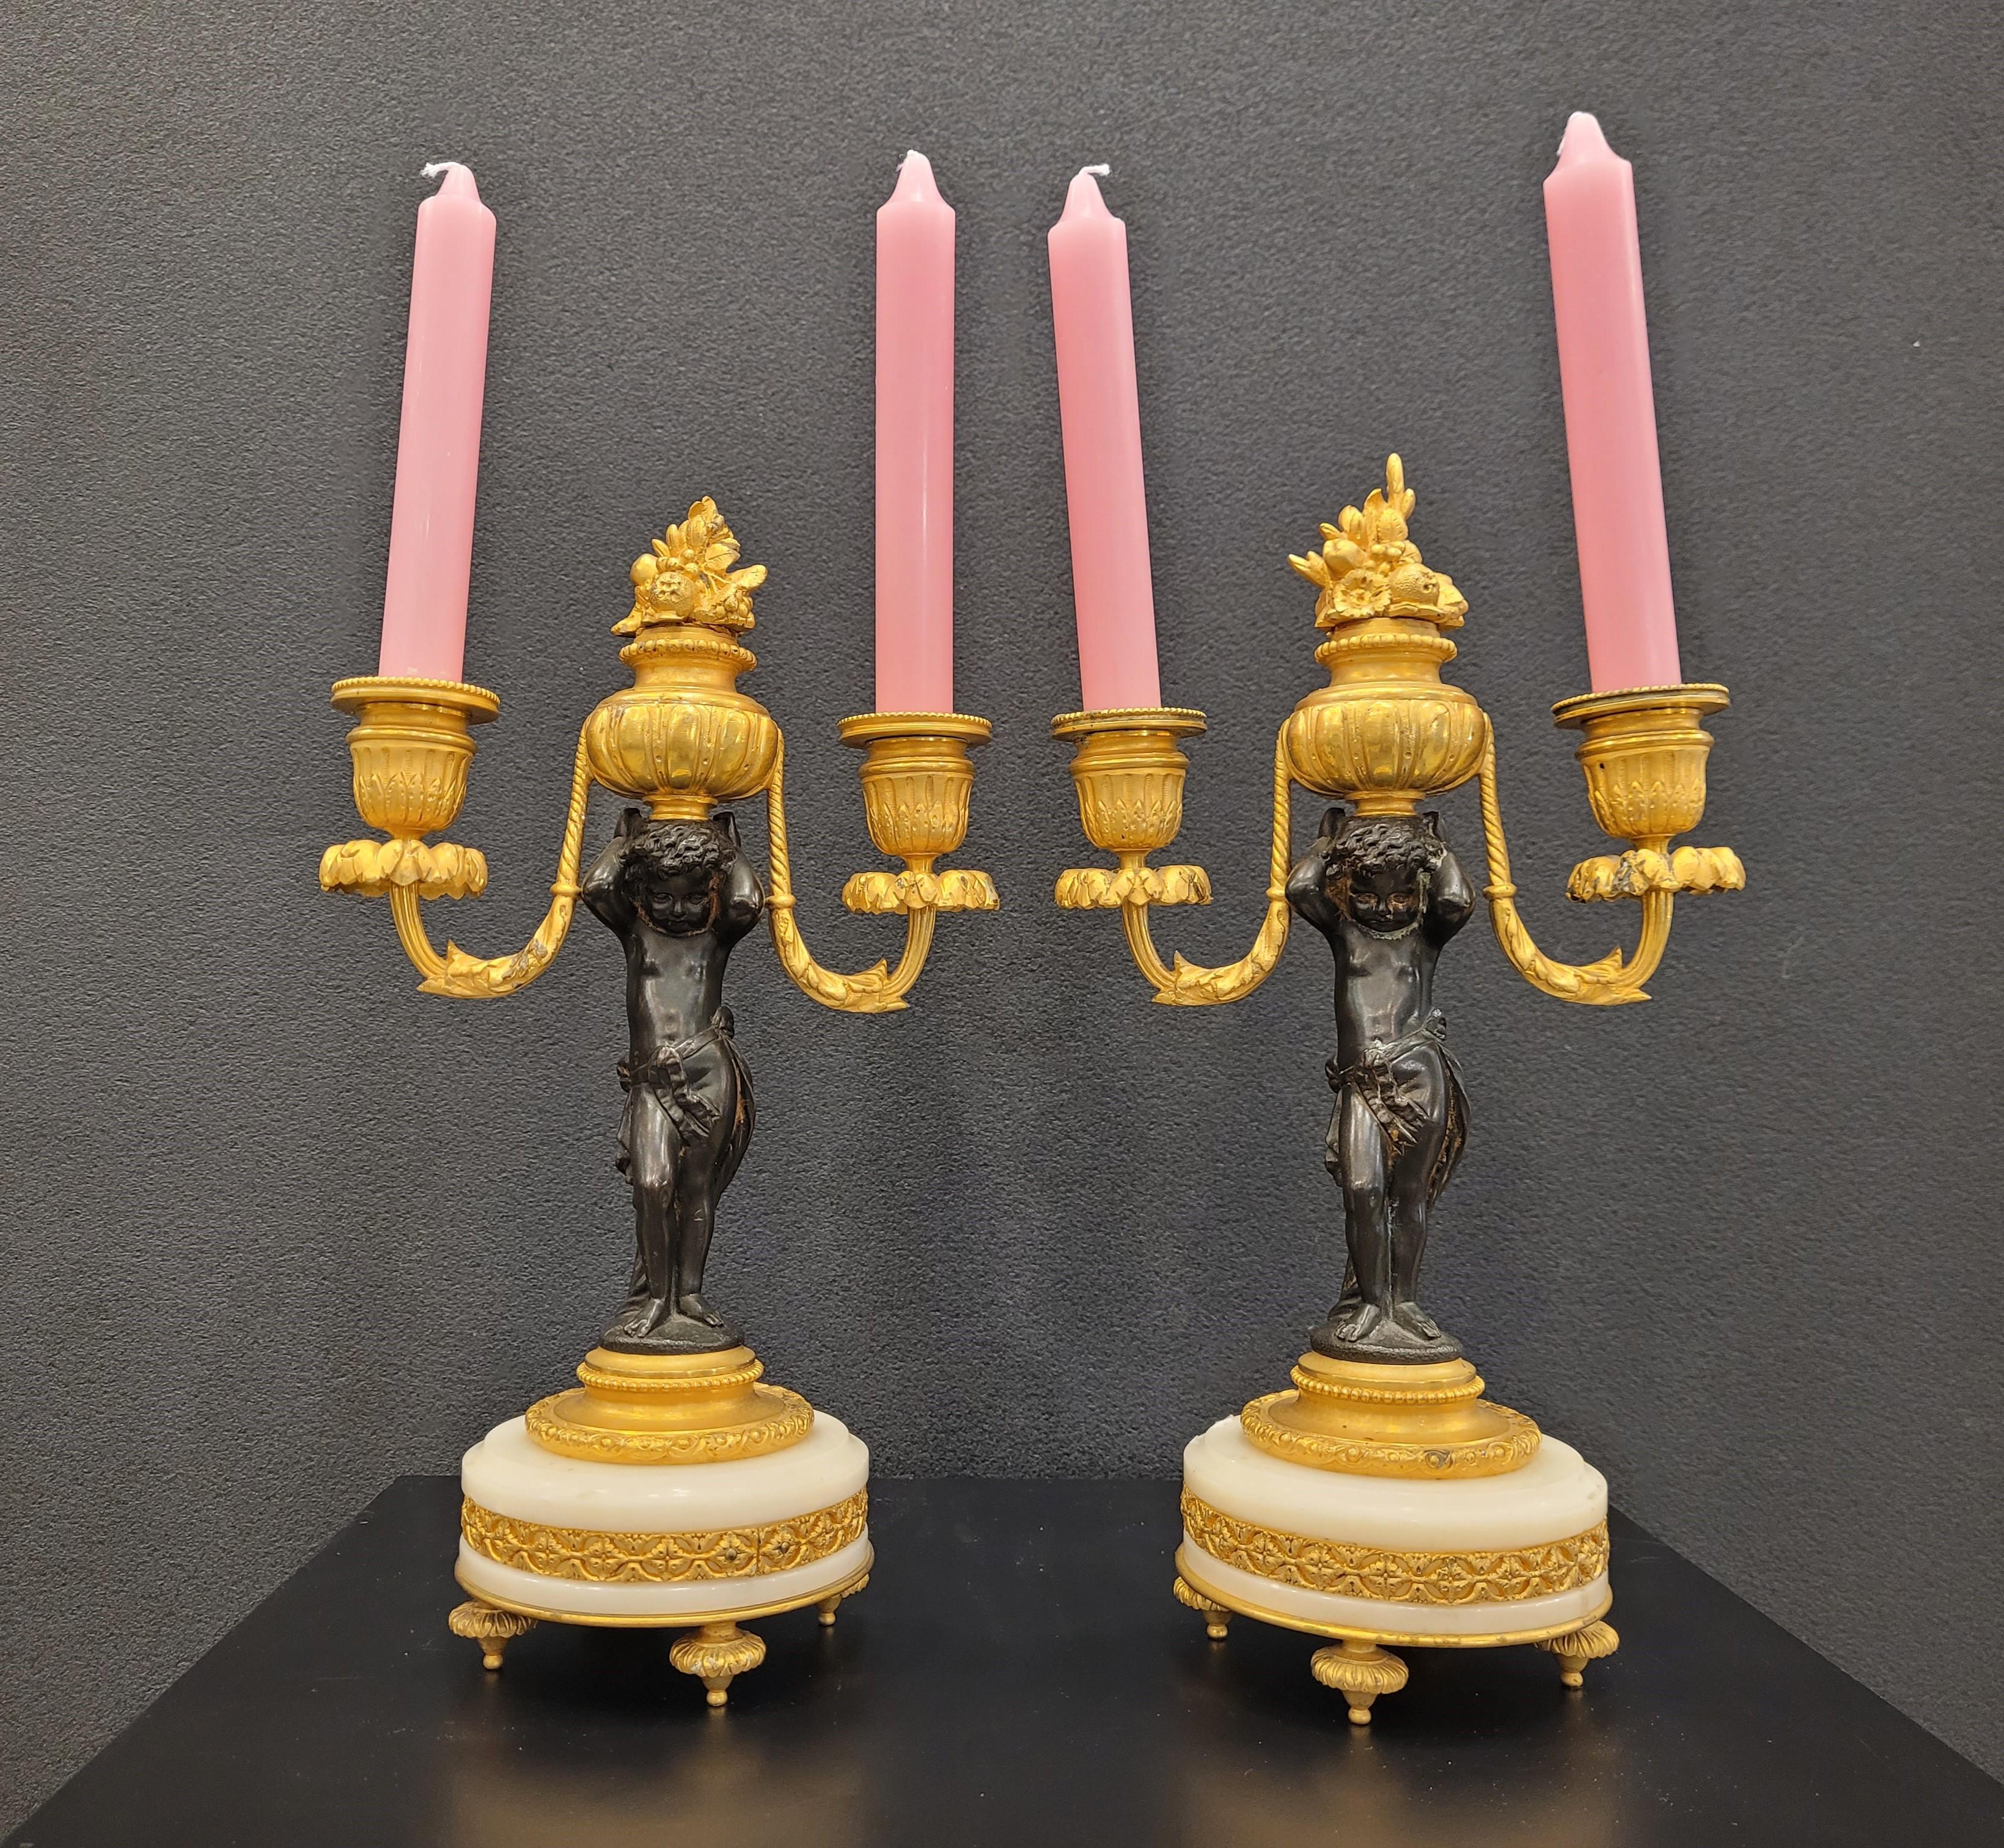 Pair of very beautiful French antique gilt bronze candlesticks with putti and marble base with decorative bronze ornaments.
It has a foundry stamp on the bottom with Unis France, which is always a sign of quality.
Condition is good, with some minor,